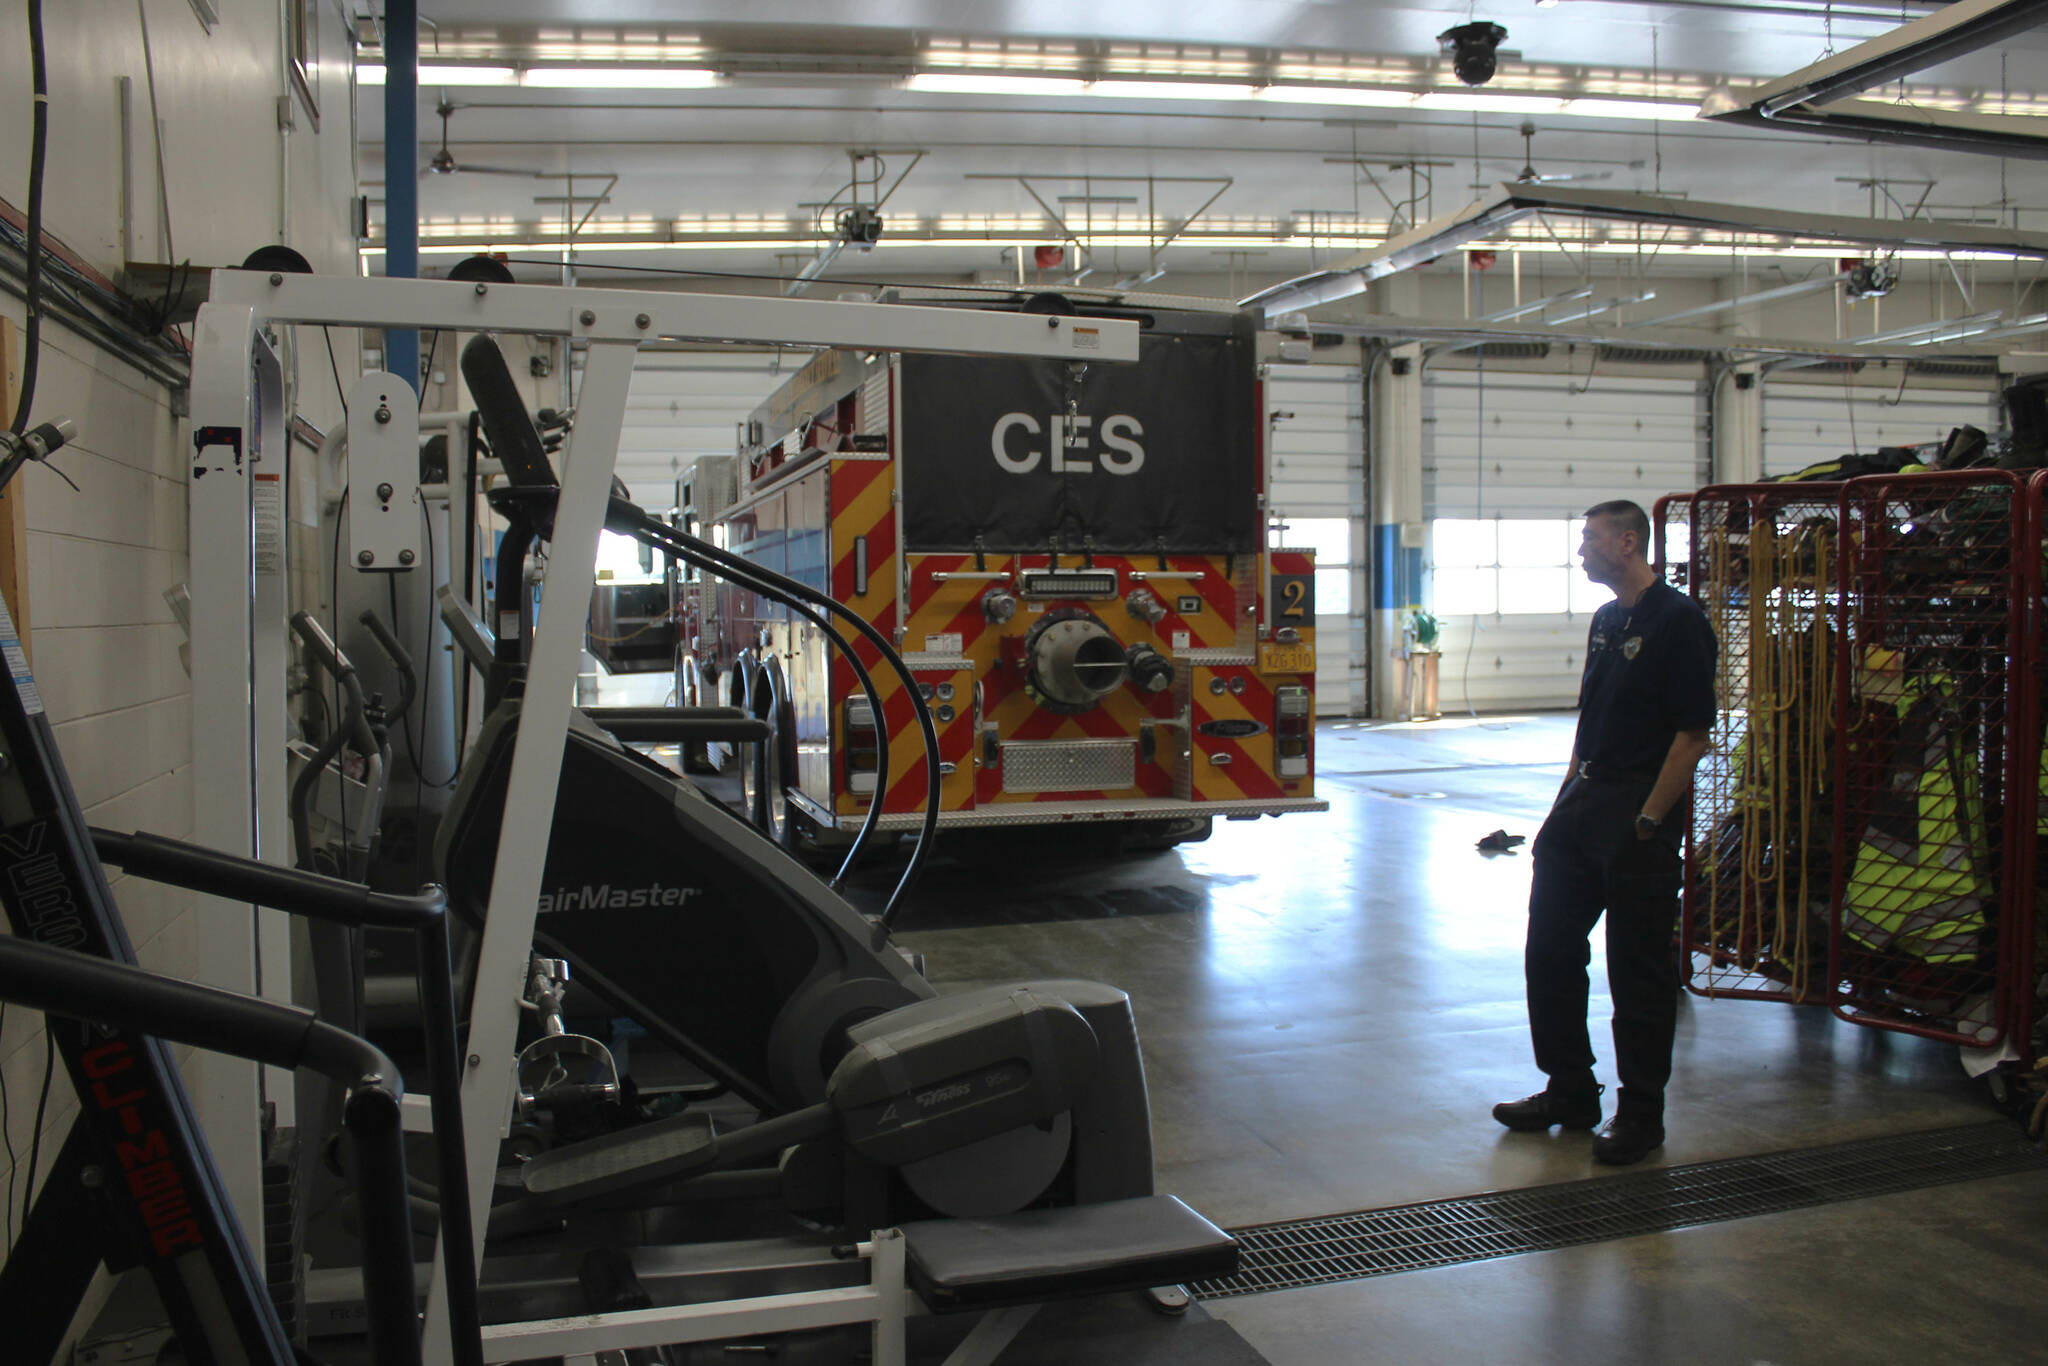 Central Emergency Services Fire Chief Roy Browning stands amid cardio equipment and firefighter lockers in the agency’s vehicle bay on Tuesday, July 26, 2022, in Soldotna, Alaska. (Ashlyn O’Hara/Peninsula Clarion)